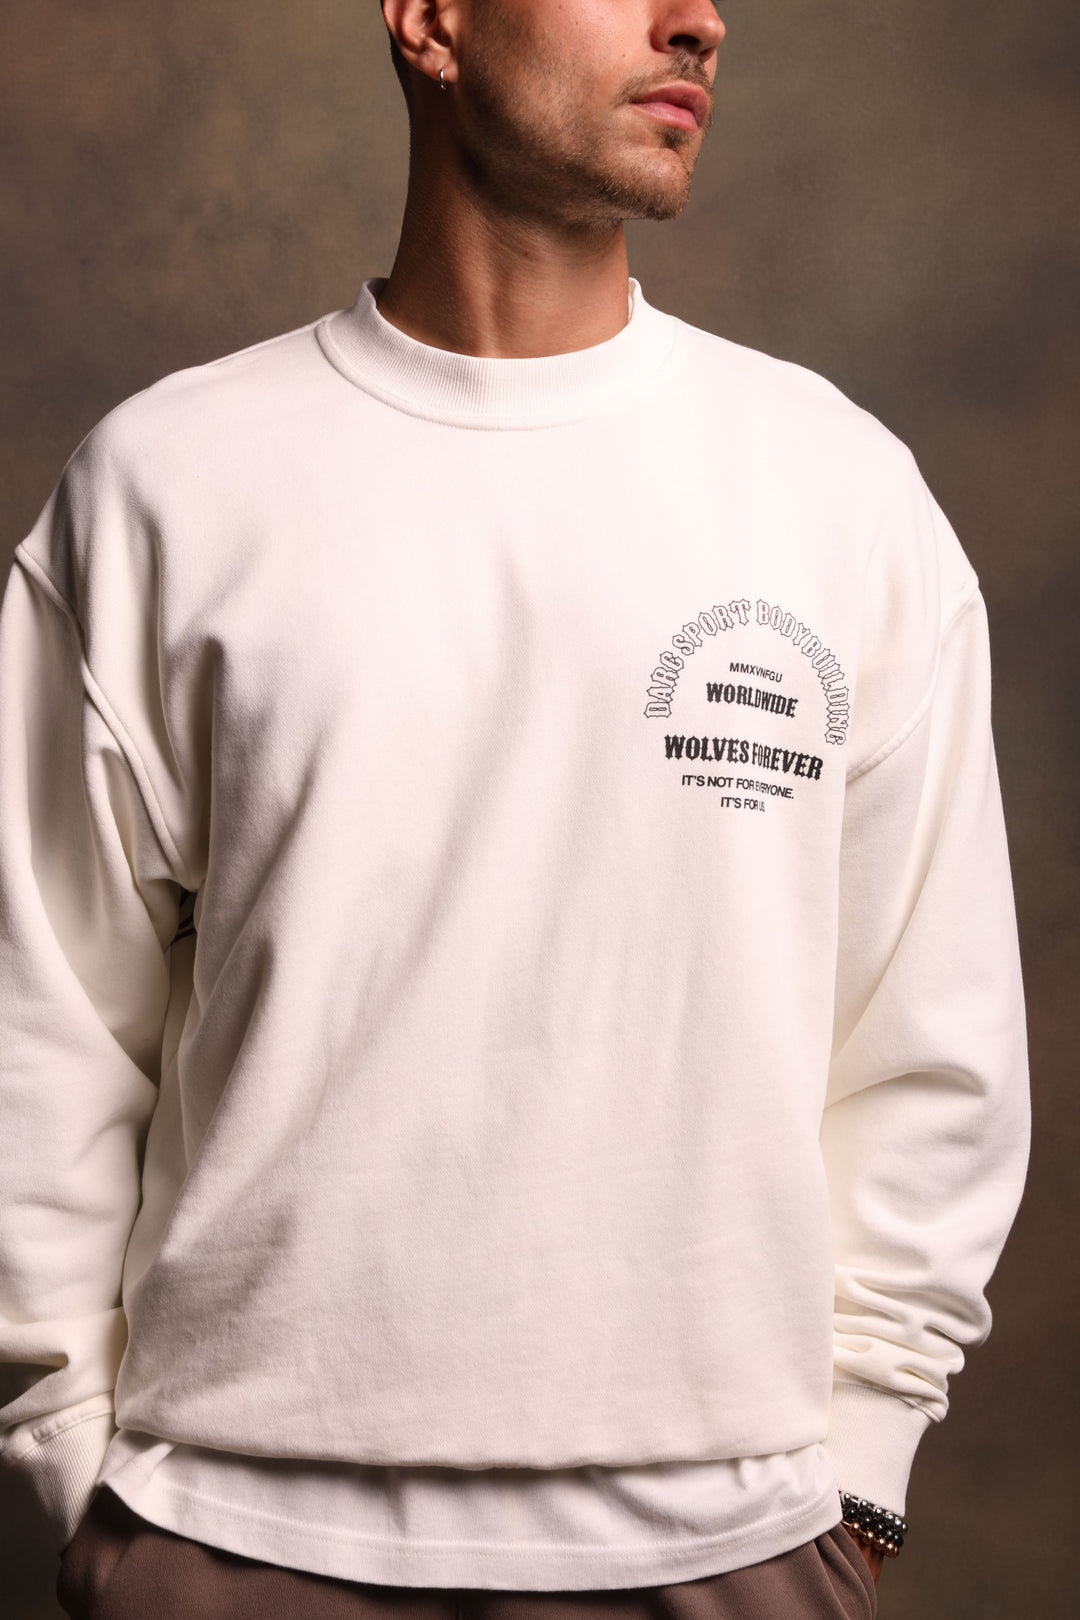 The One You Feed "Vintage London" Crewneck in Cream